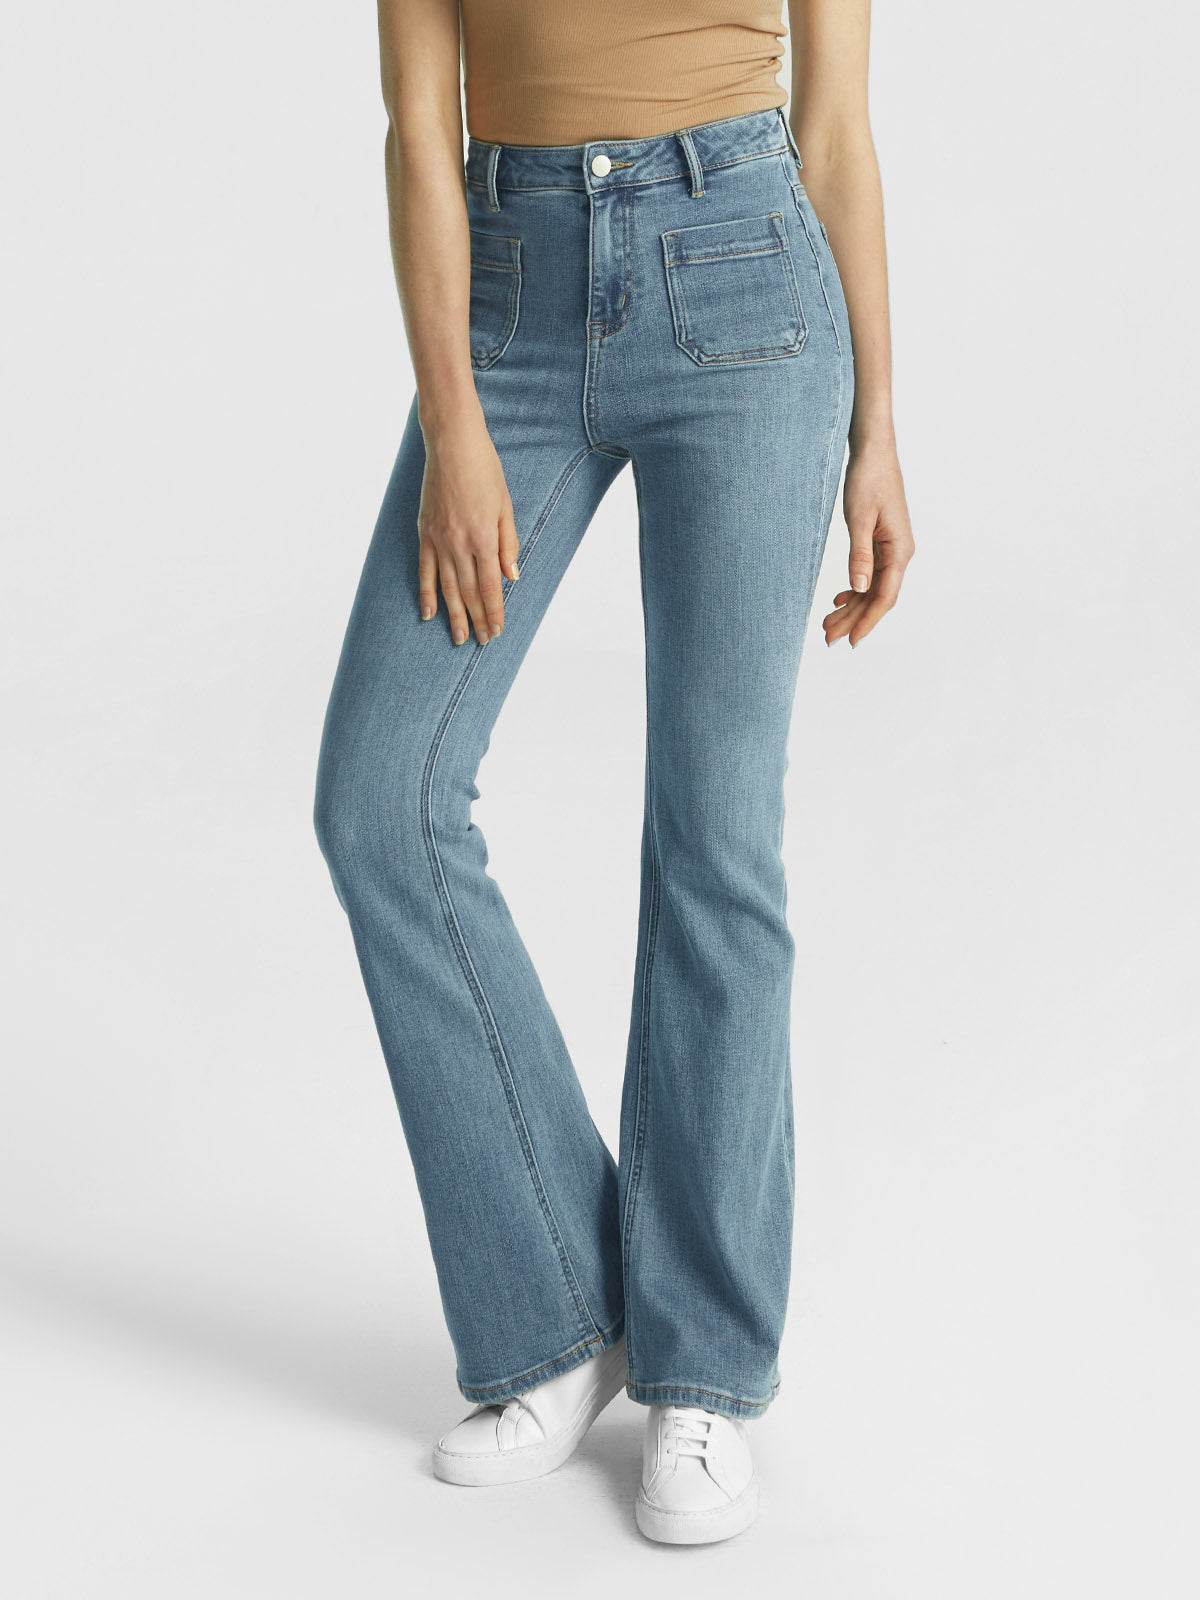 OGLmove Jeans Sustainable Front Pocket Flare Jeans for Women